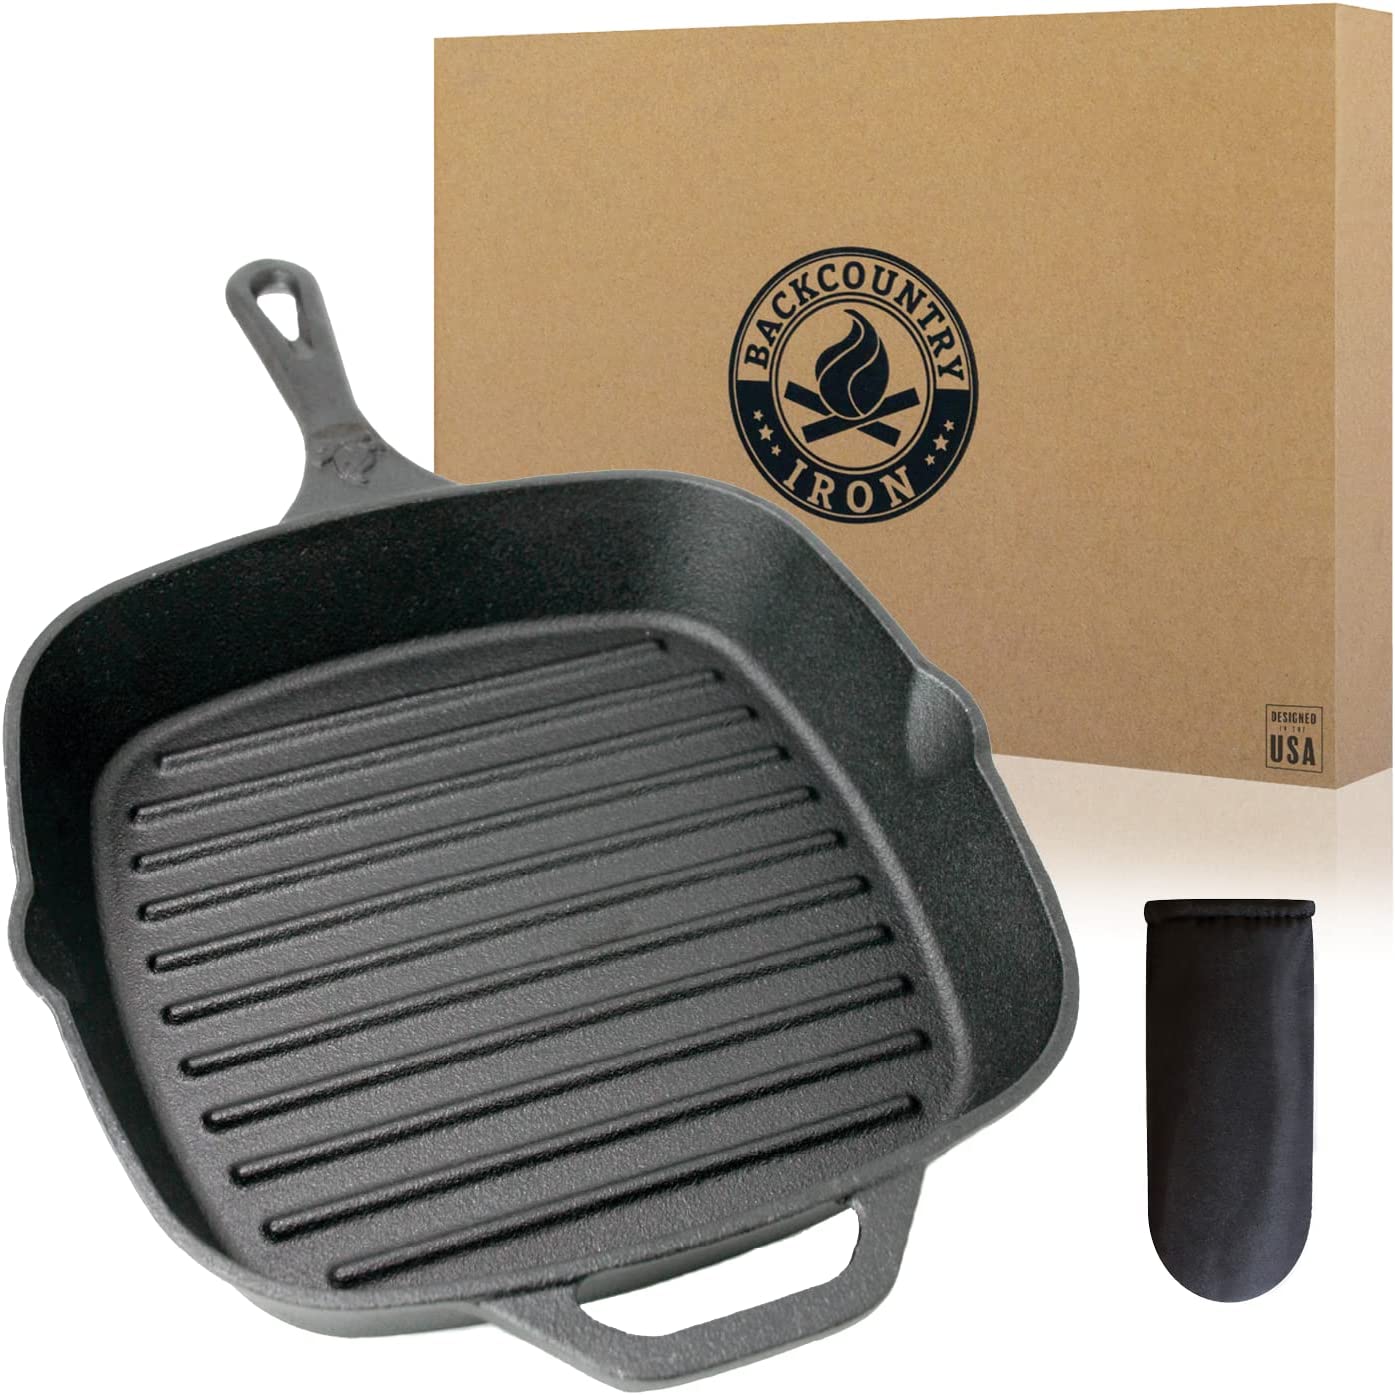 Backcountry Pour Spouts Cast Iron Grill, 8-Inch